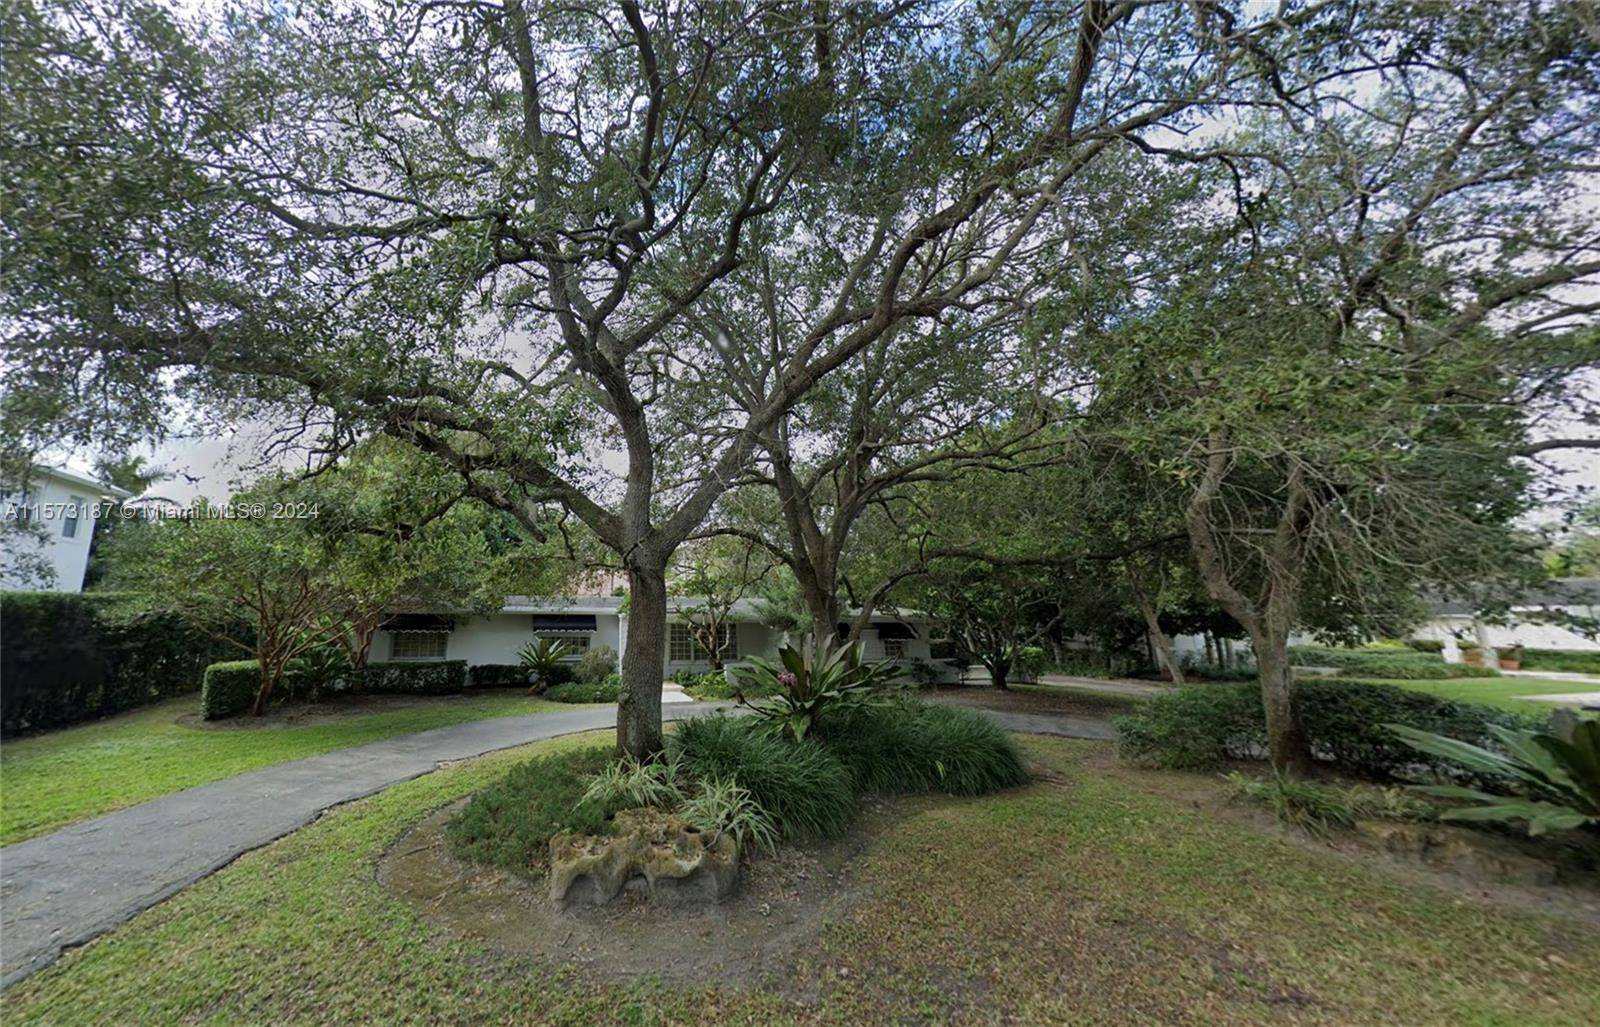 Prime North Pinecrest location amongst multimillion dollar homes on a quiet tree lined street.